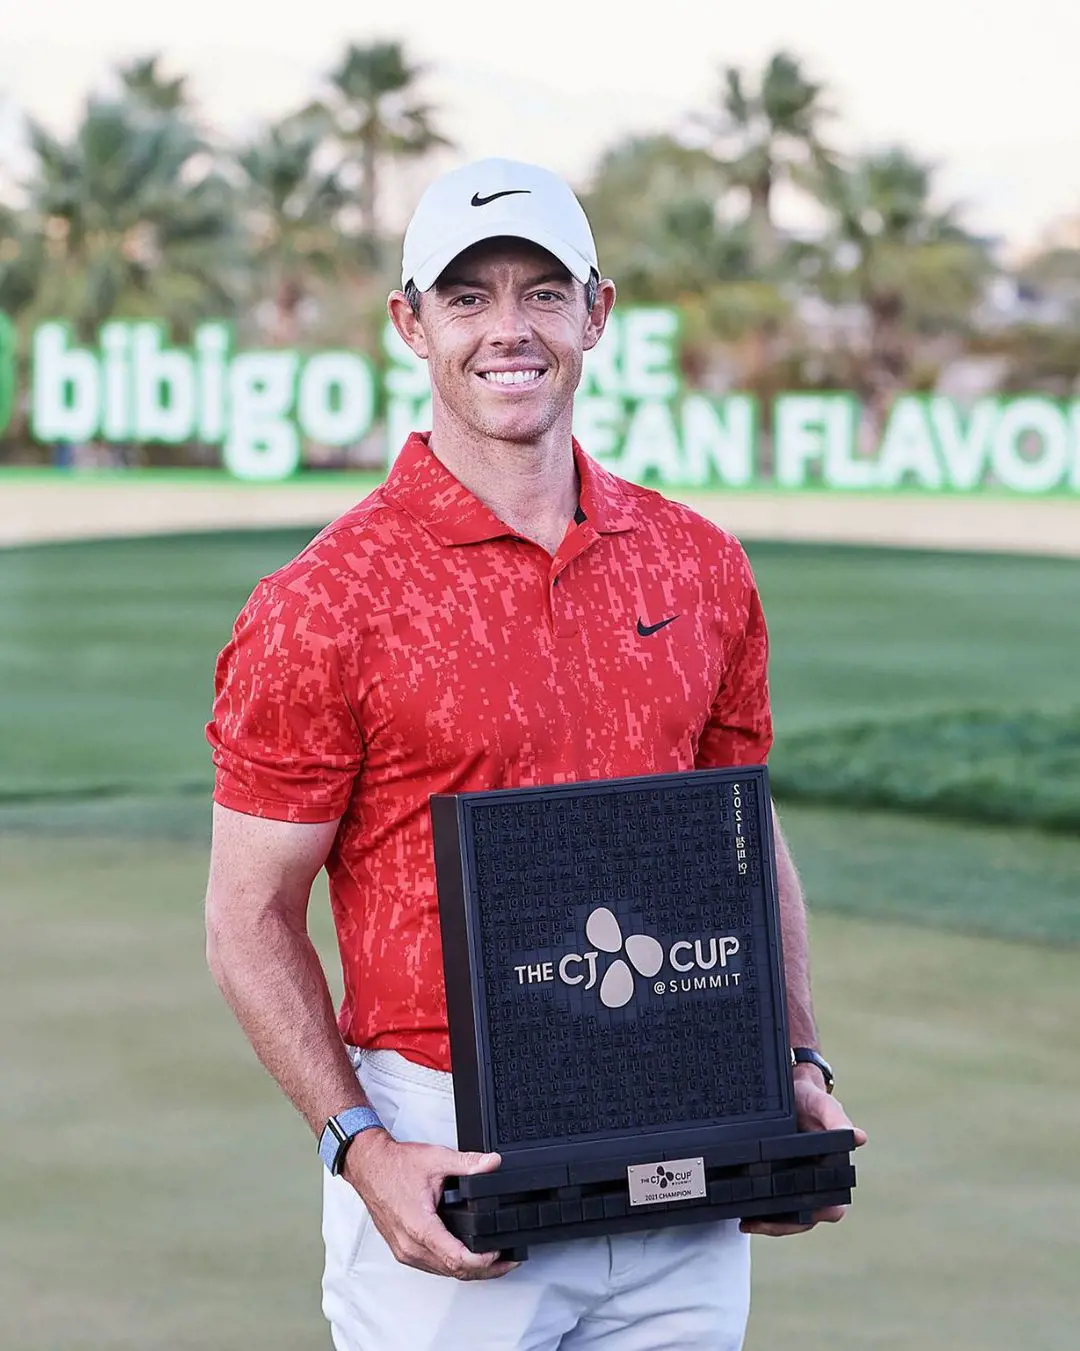 Rory clutching The CJ Cup while donning Nike logoed attire on October 18, 2021